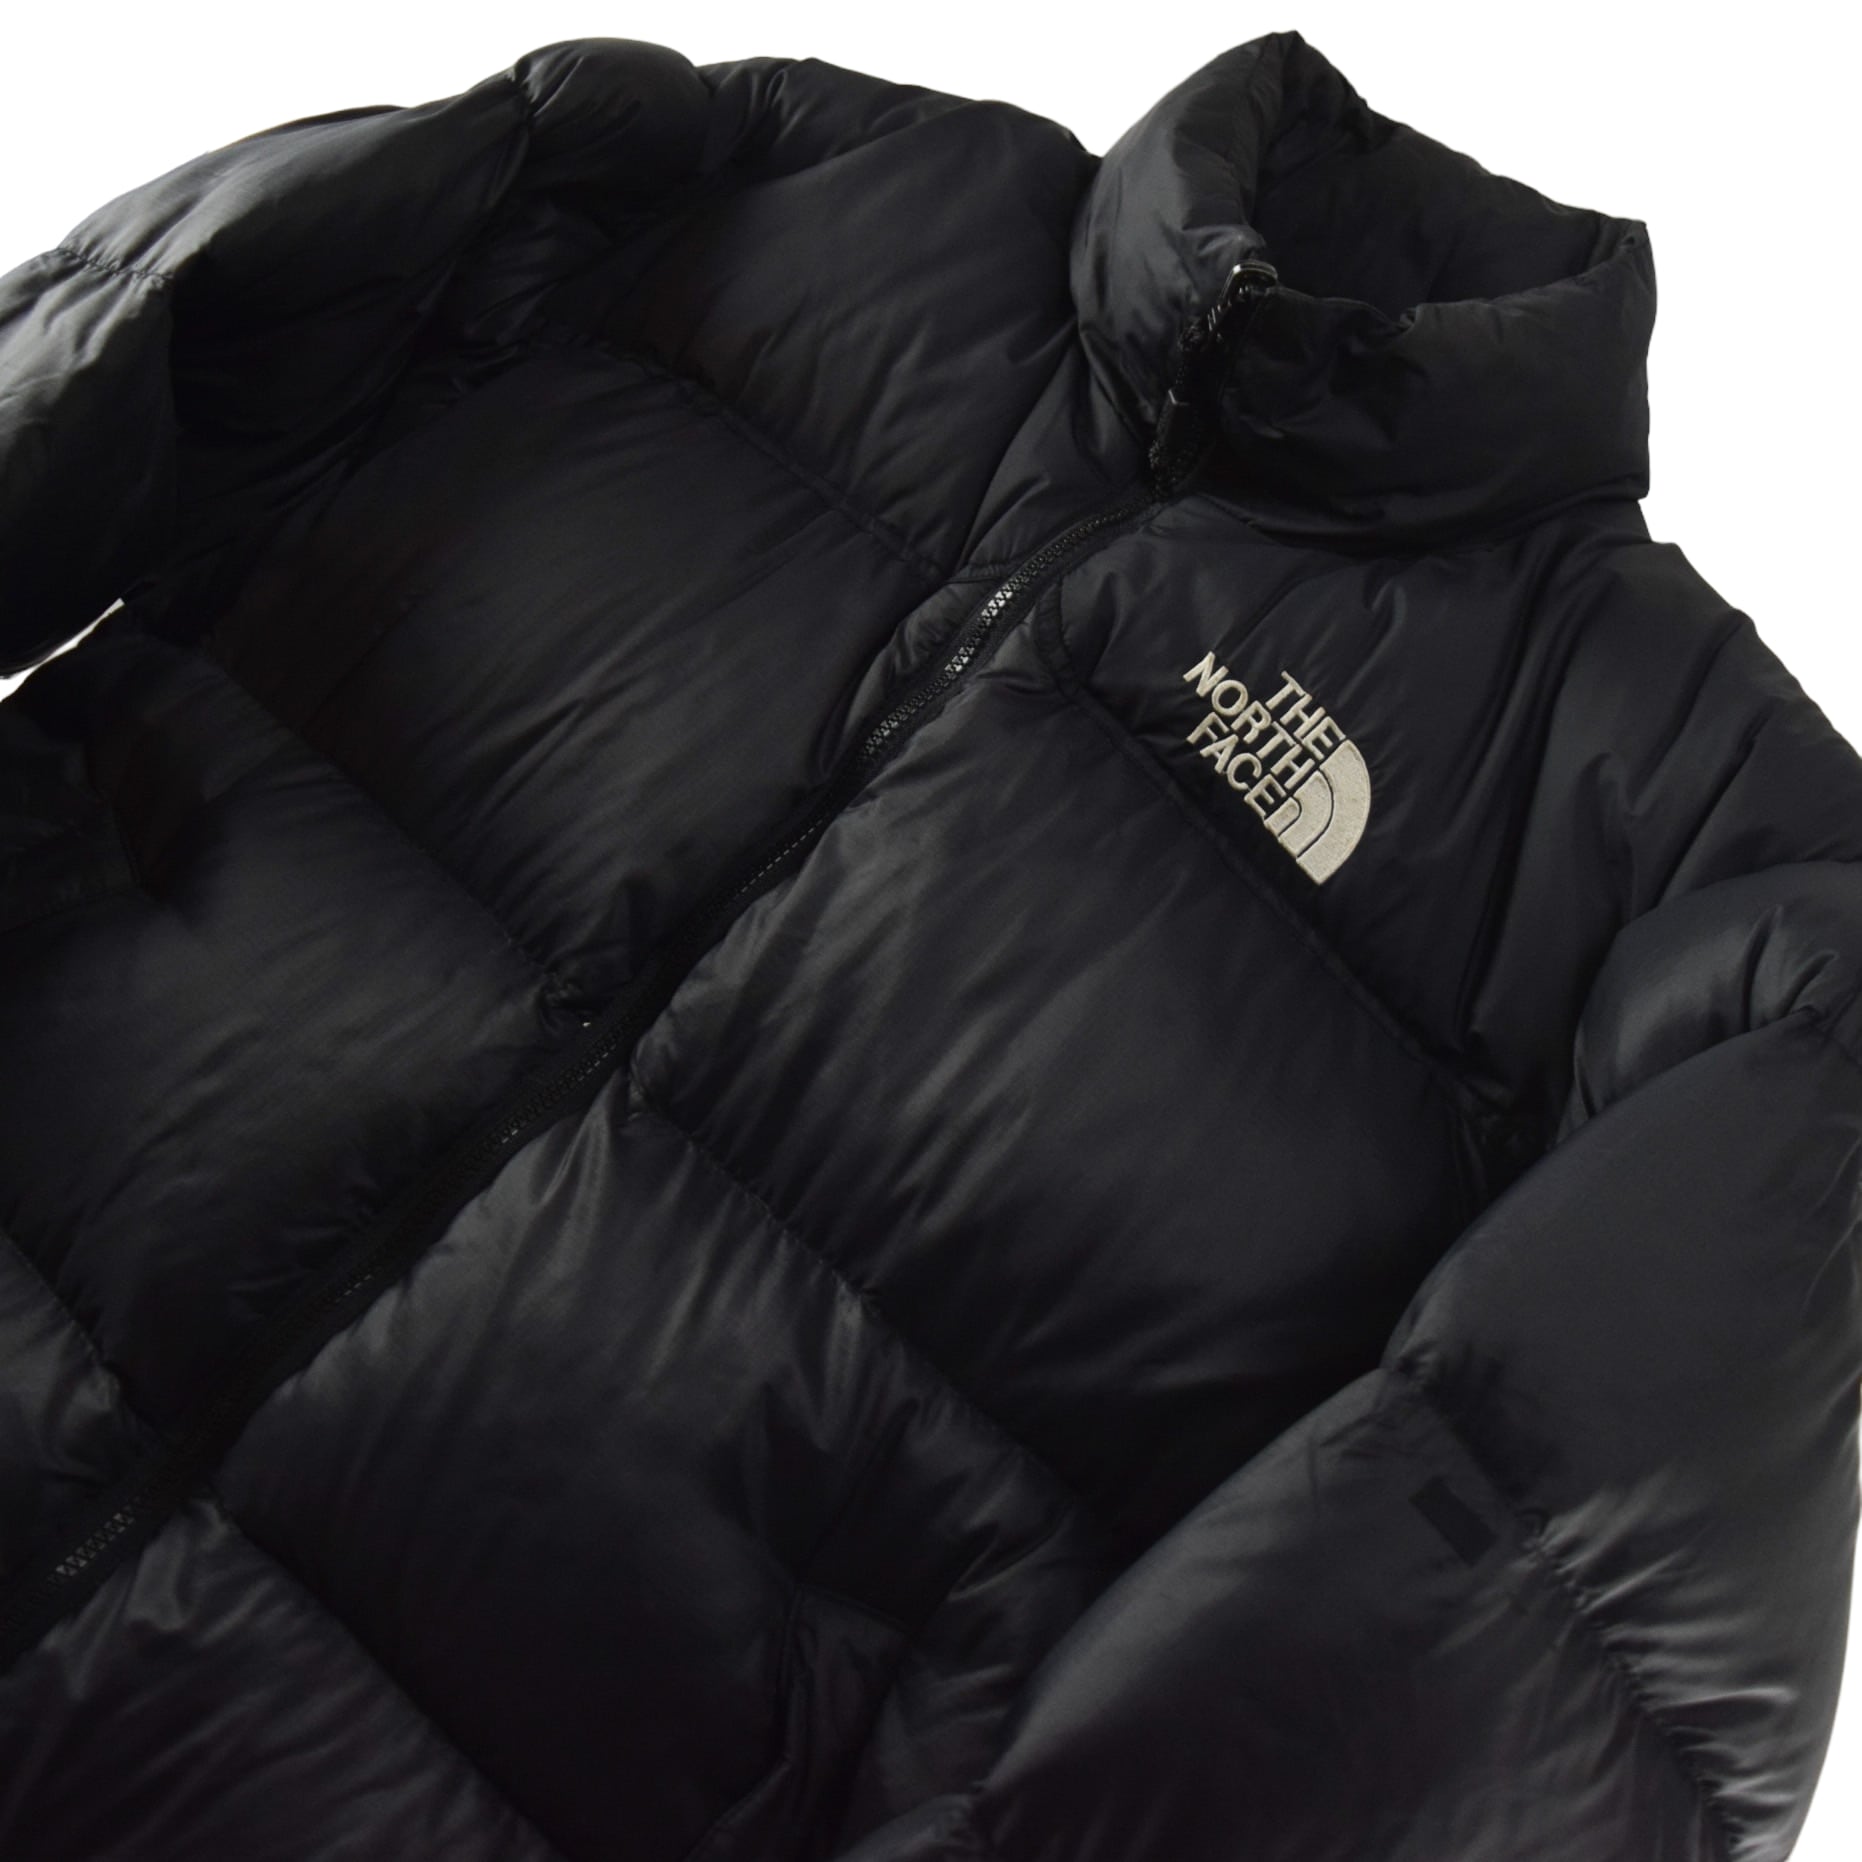 's "THE NORTH FACE" Nupste Vintage Down Jacket Black  Fill